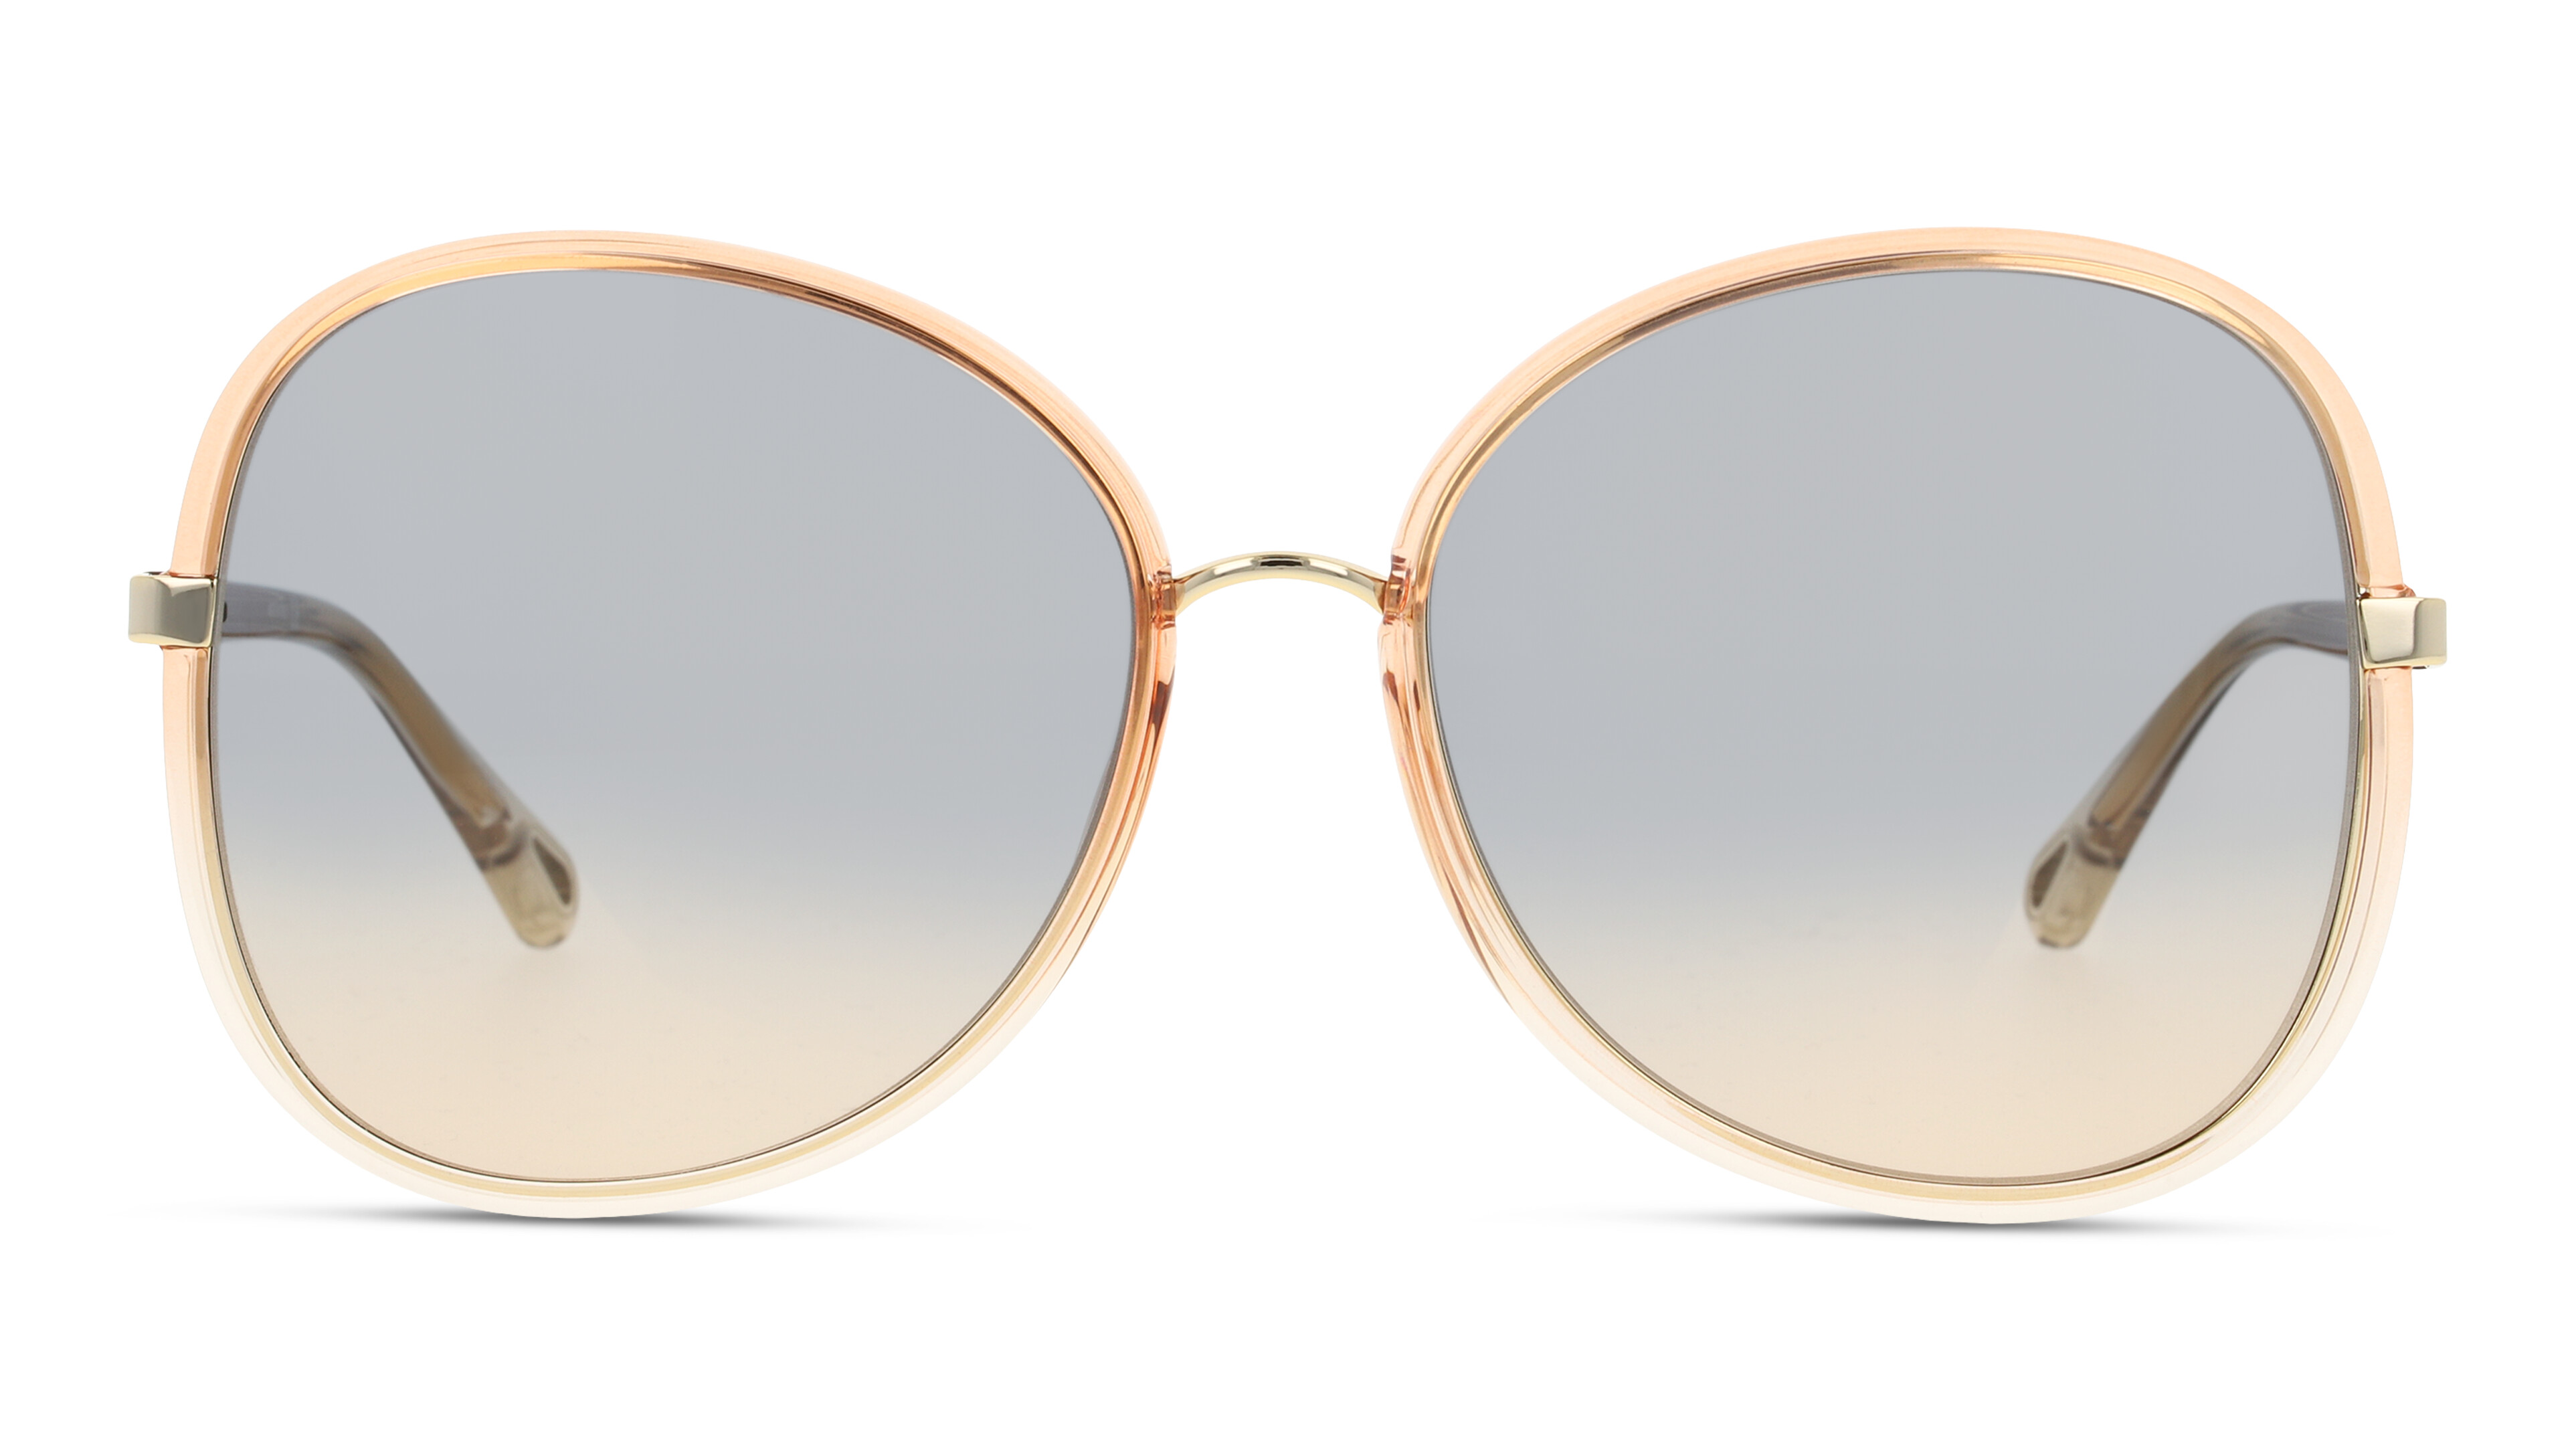 [products.image.front] Chloe CH0030S 004 Sonnenbrille